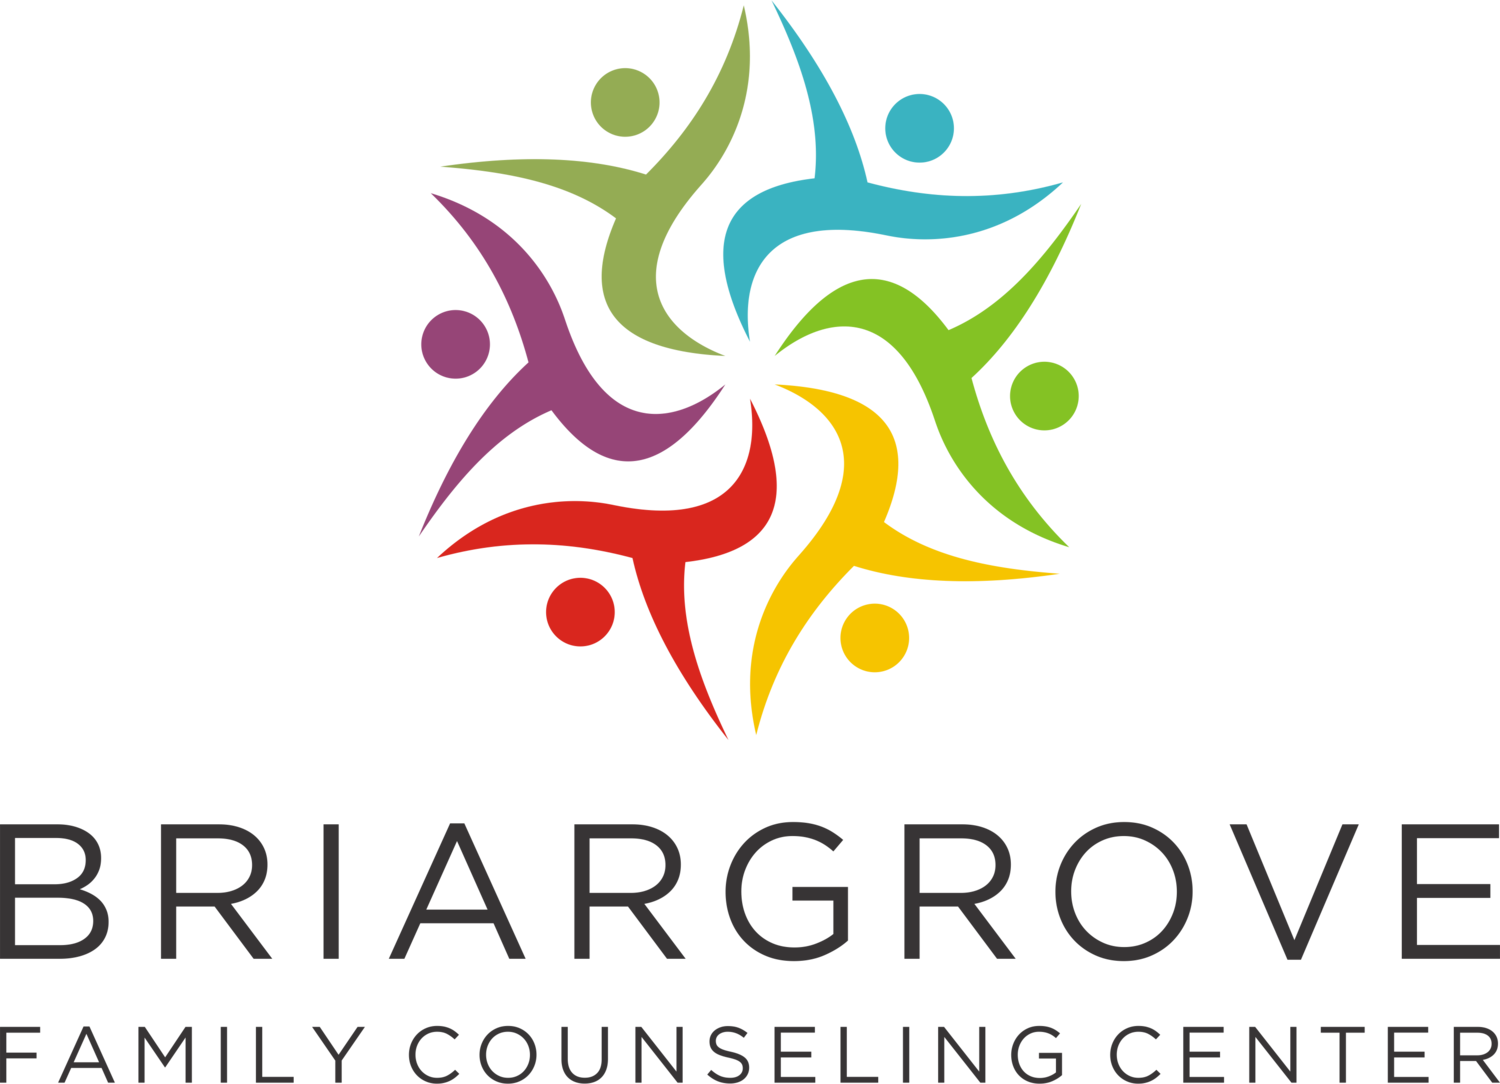 Briargrove Family Counseling Center